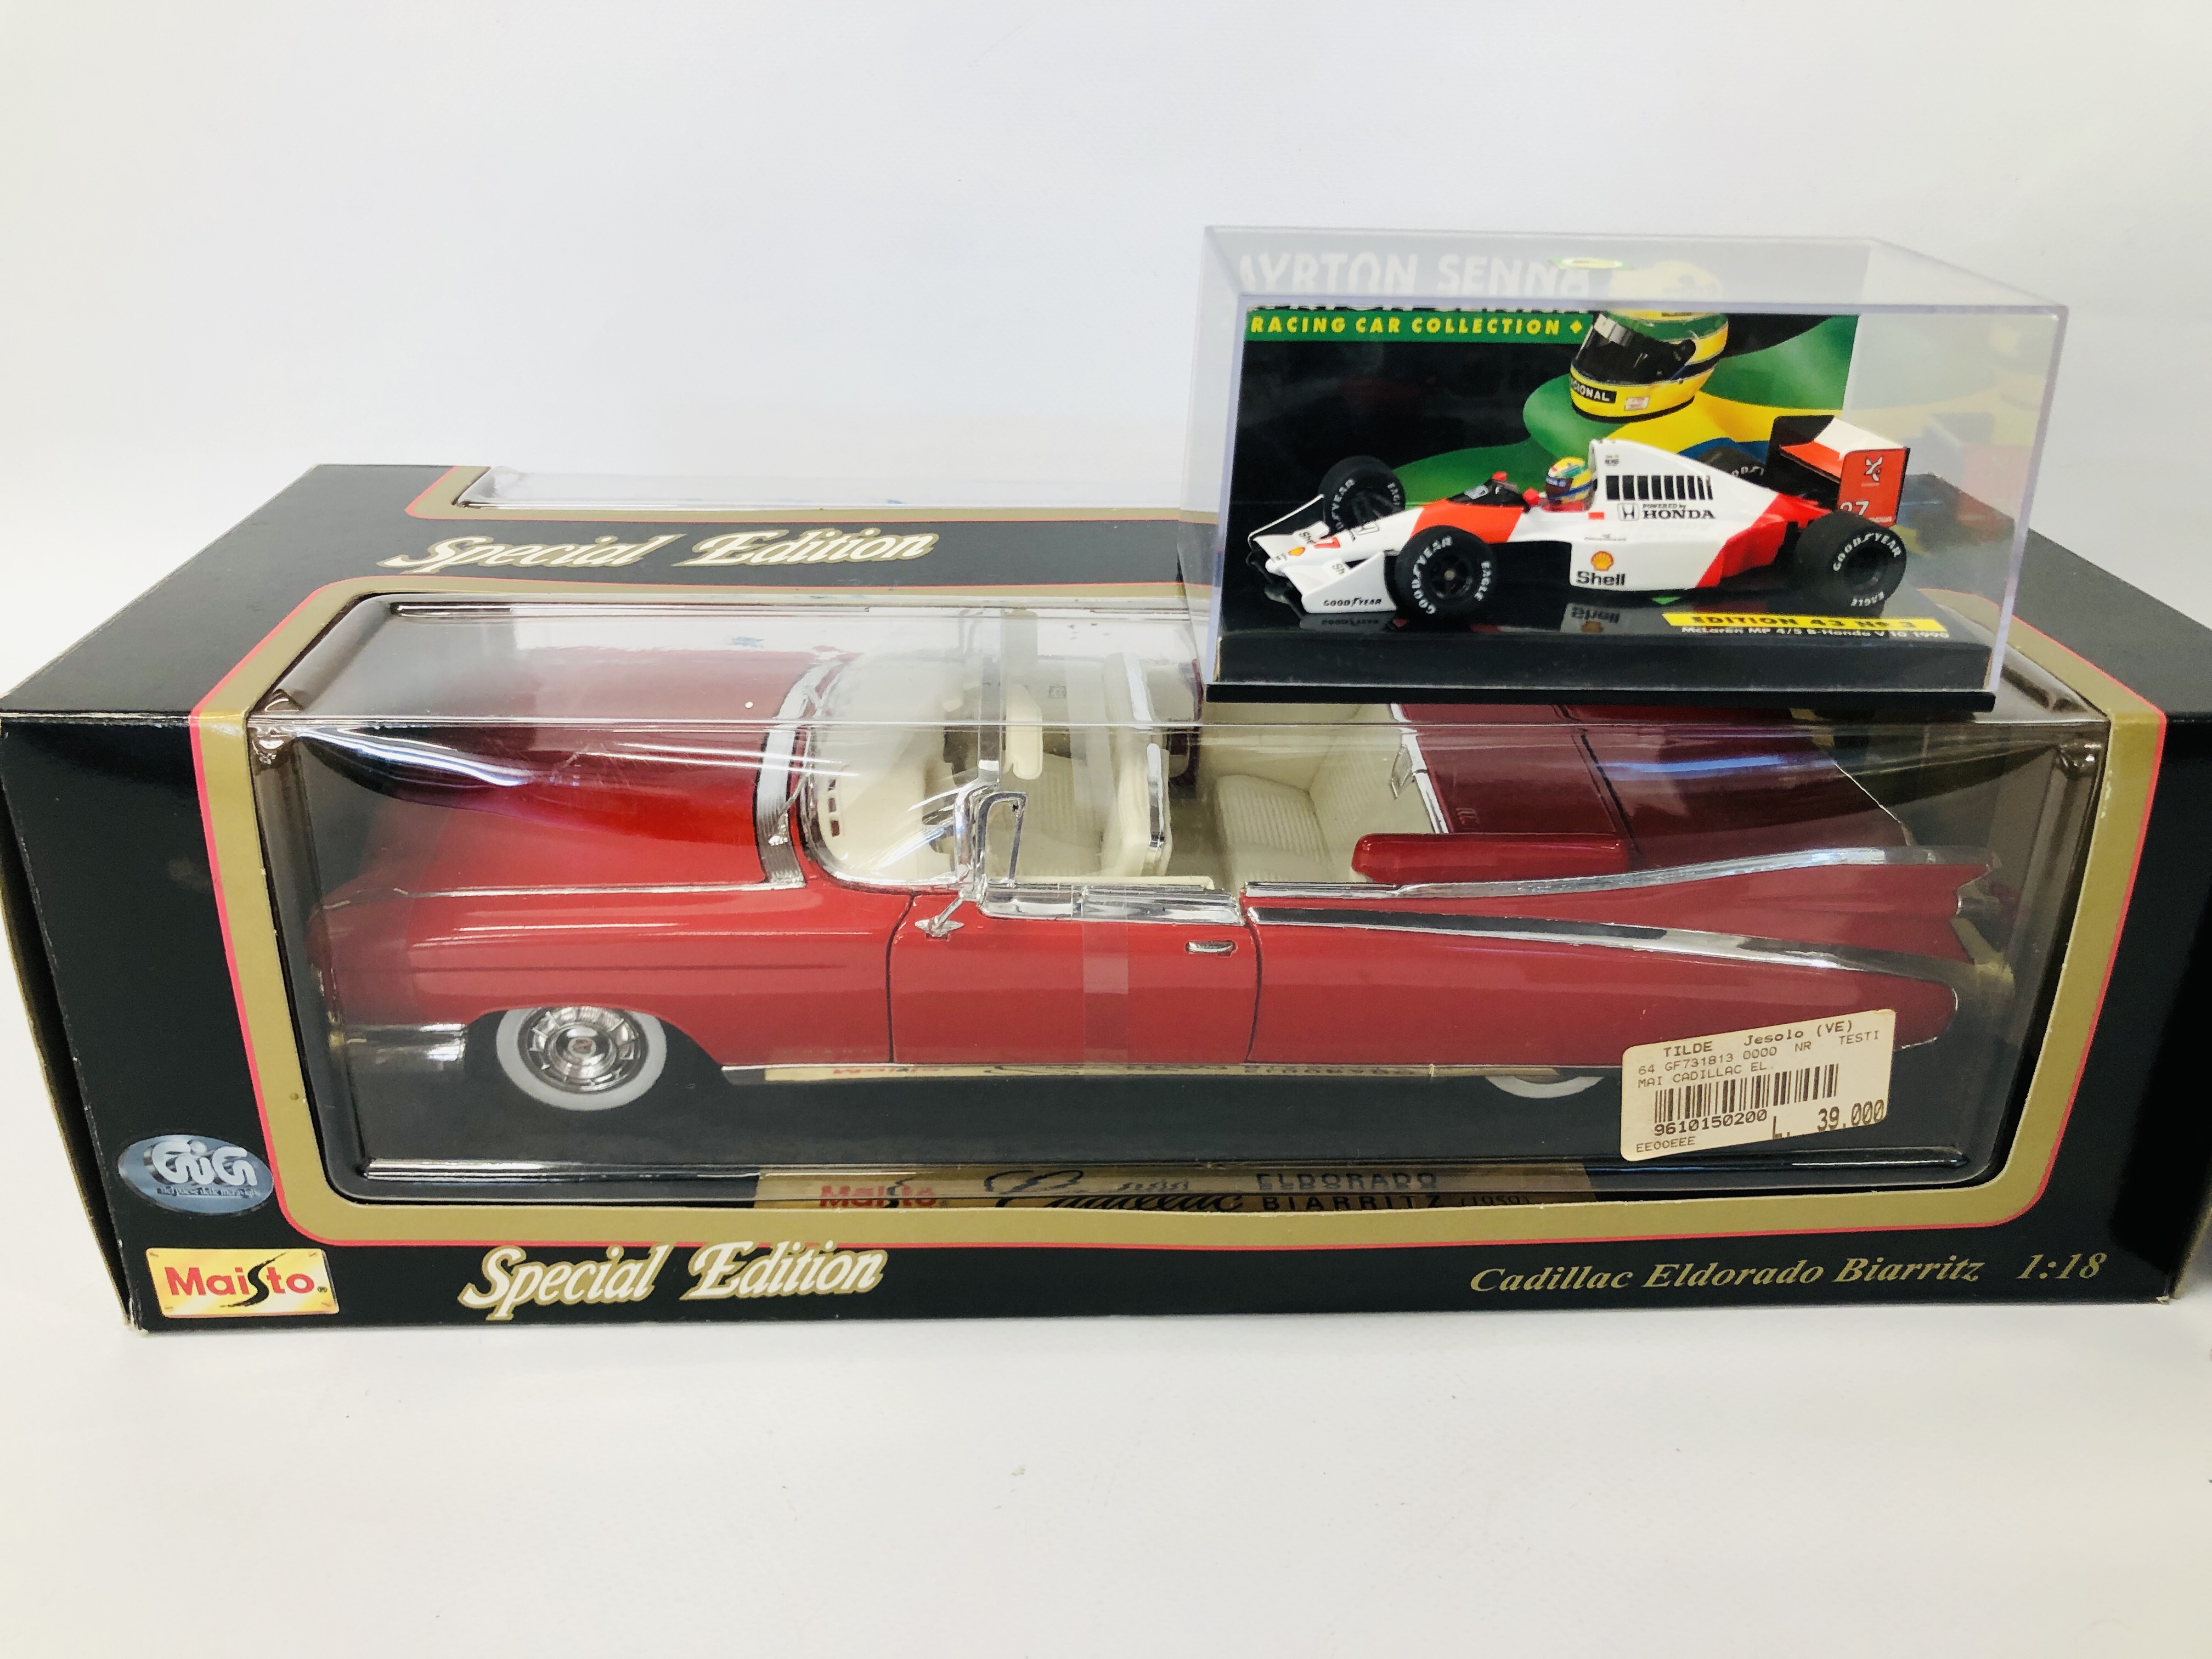 2 BOXED MAISTO SPECIAL EDITION 1:18 VEHICLES TO INCLUDE 1948 CHEVROLET FLEETMASTER AND CADILLAC - Image 2 of 3